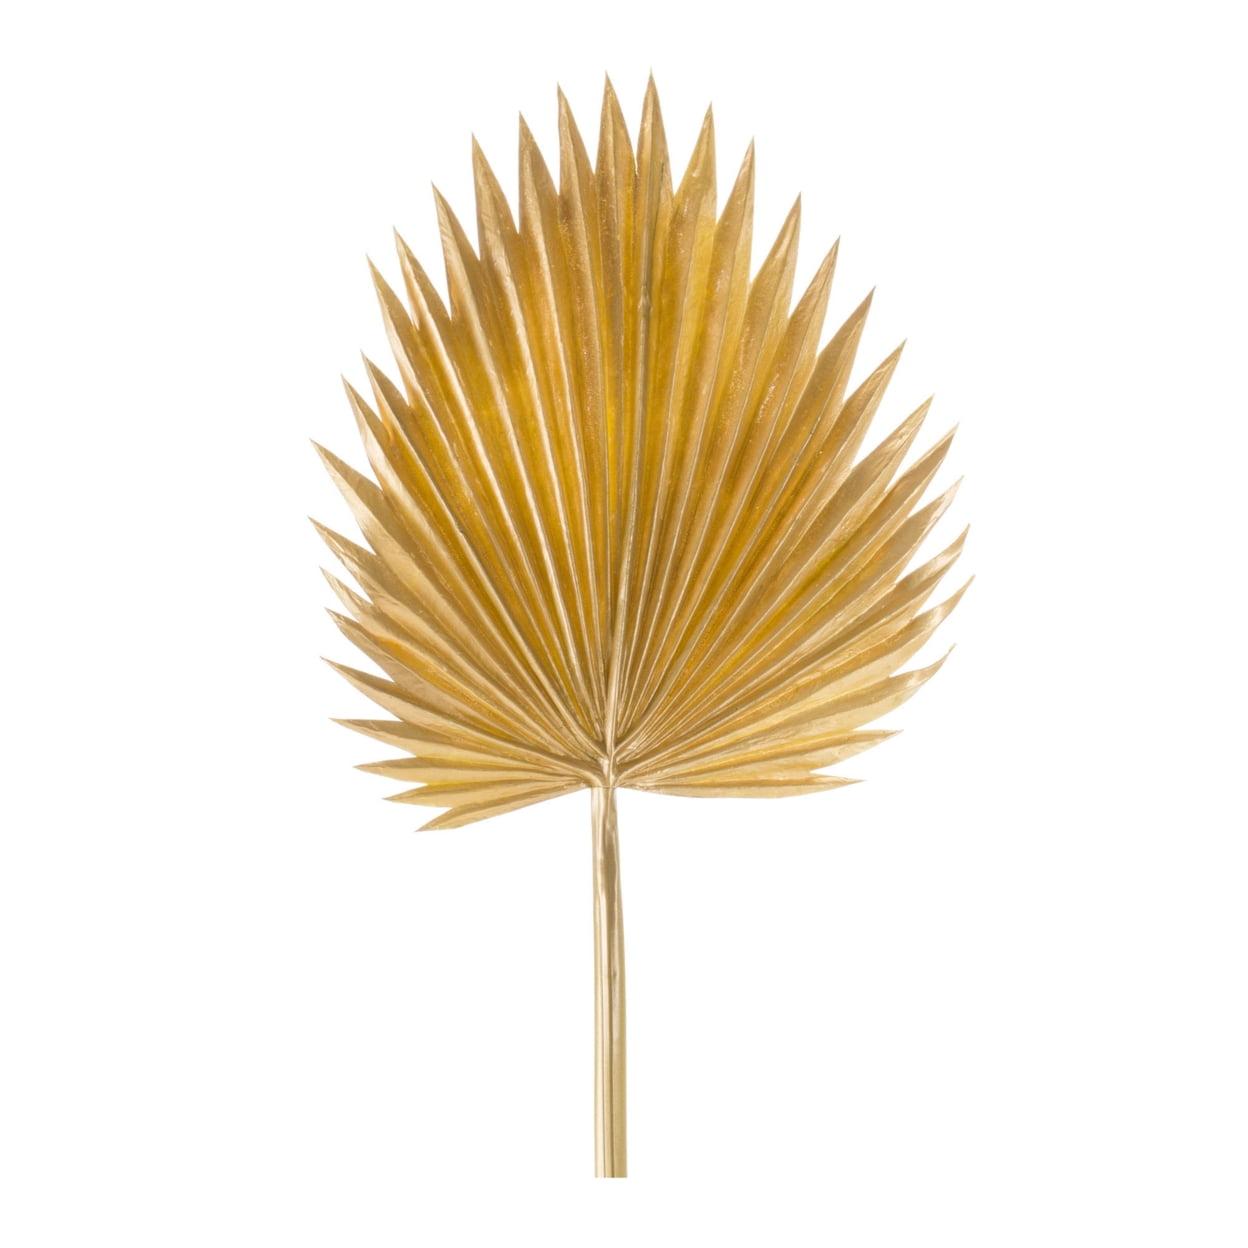 Tropical Elegance 37" Fan Palm Leaf Arrangement in Yellow and Brown